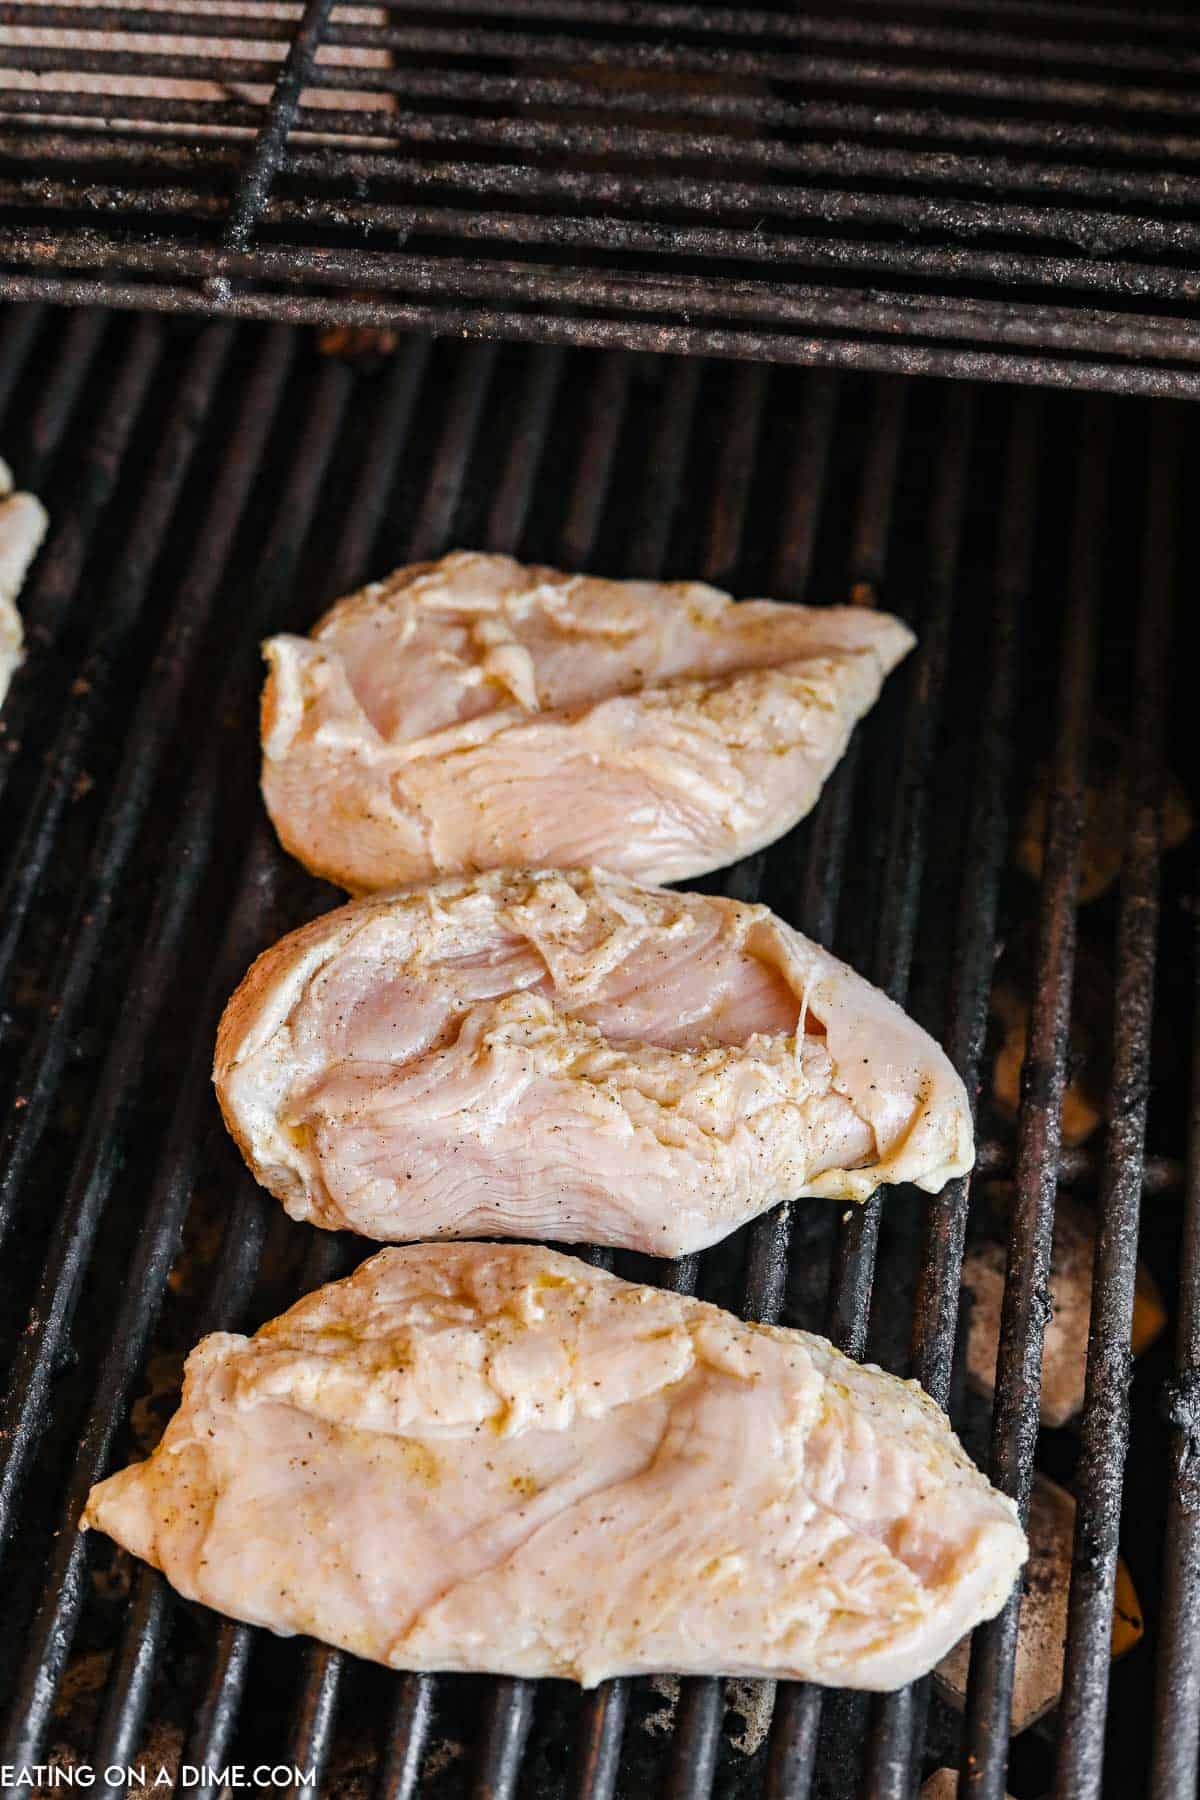 Marinating chicken breast on the grill